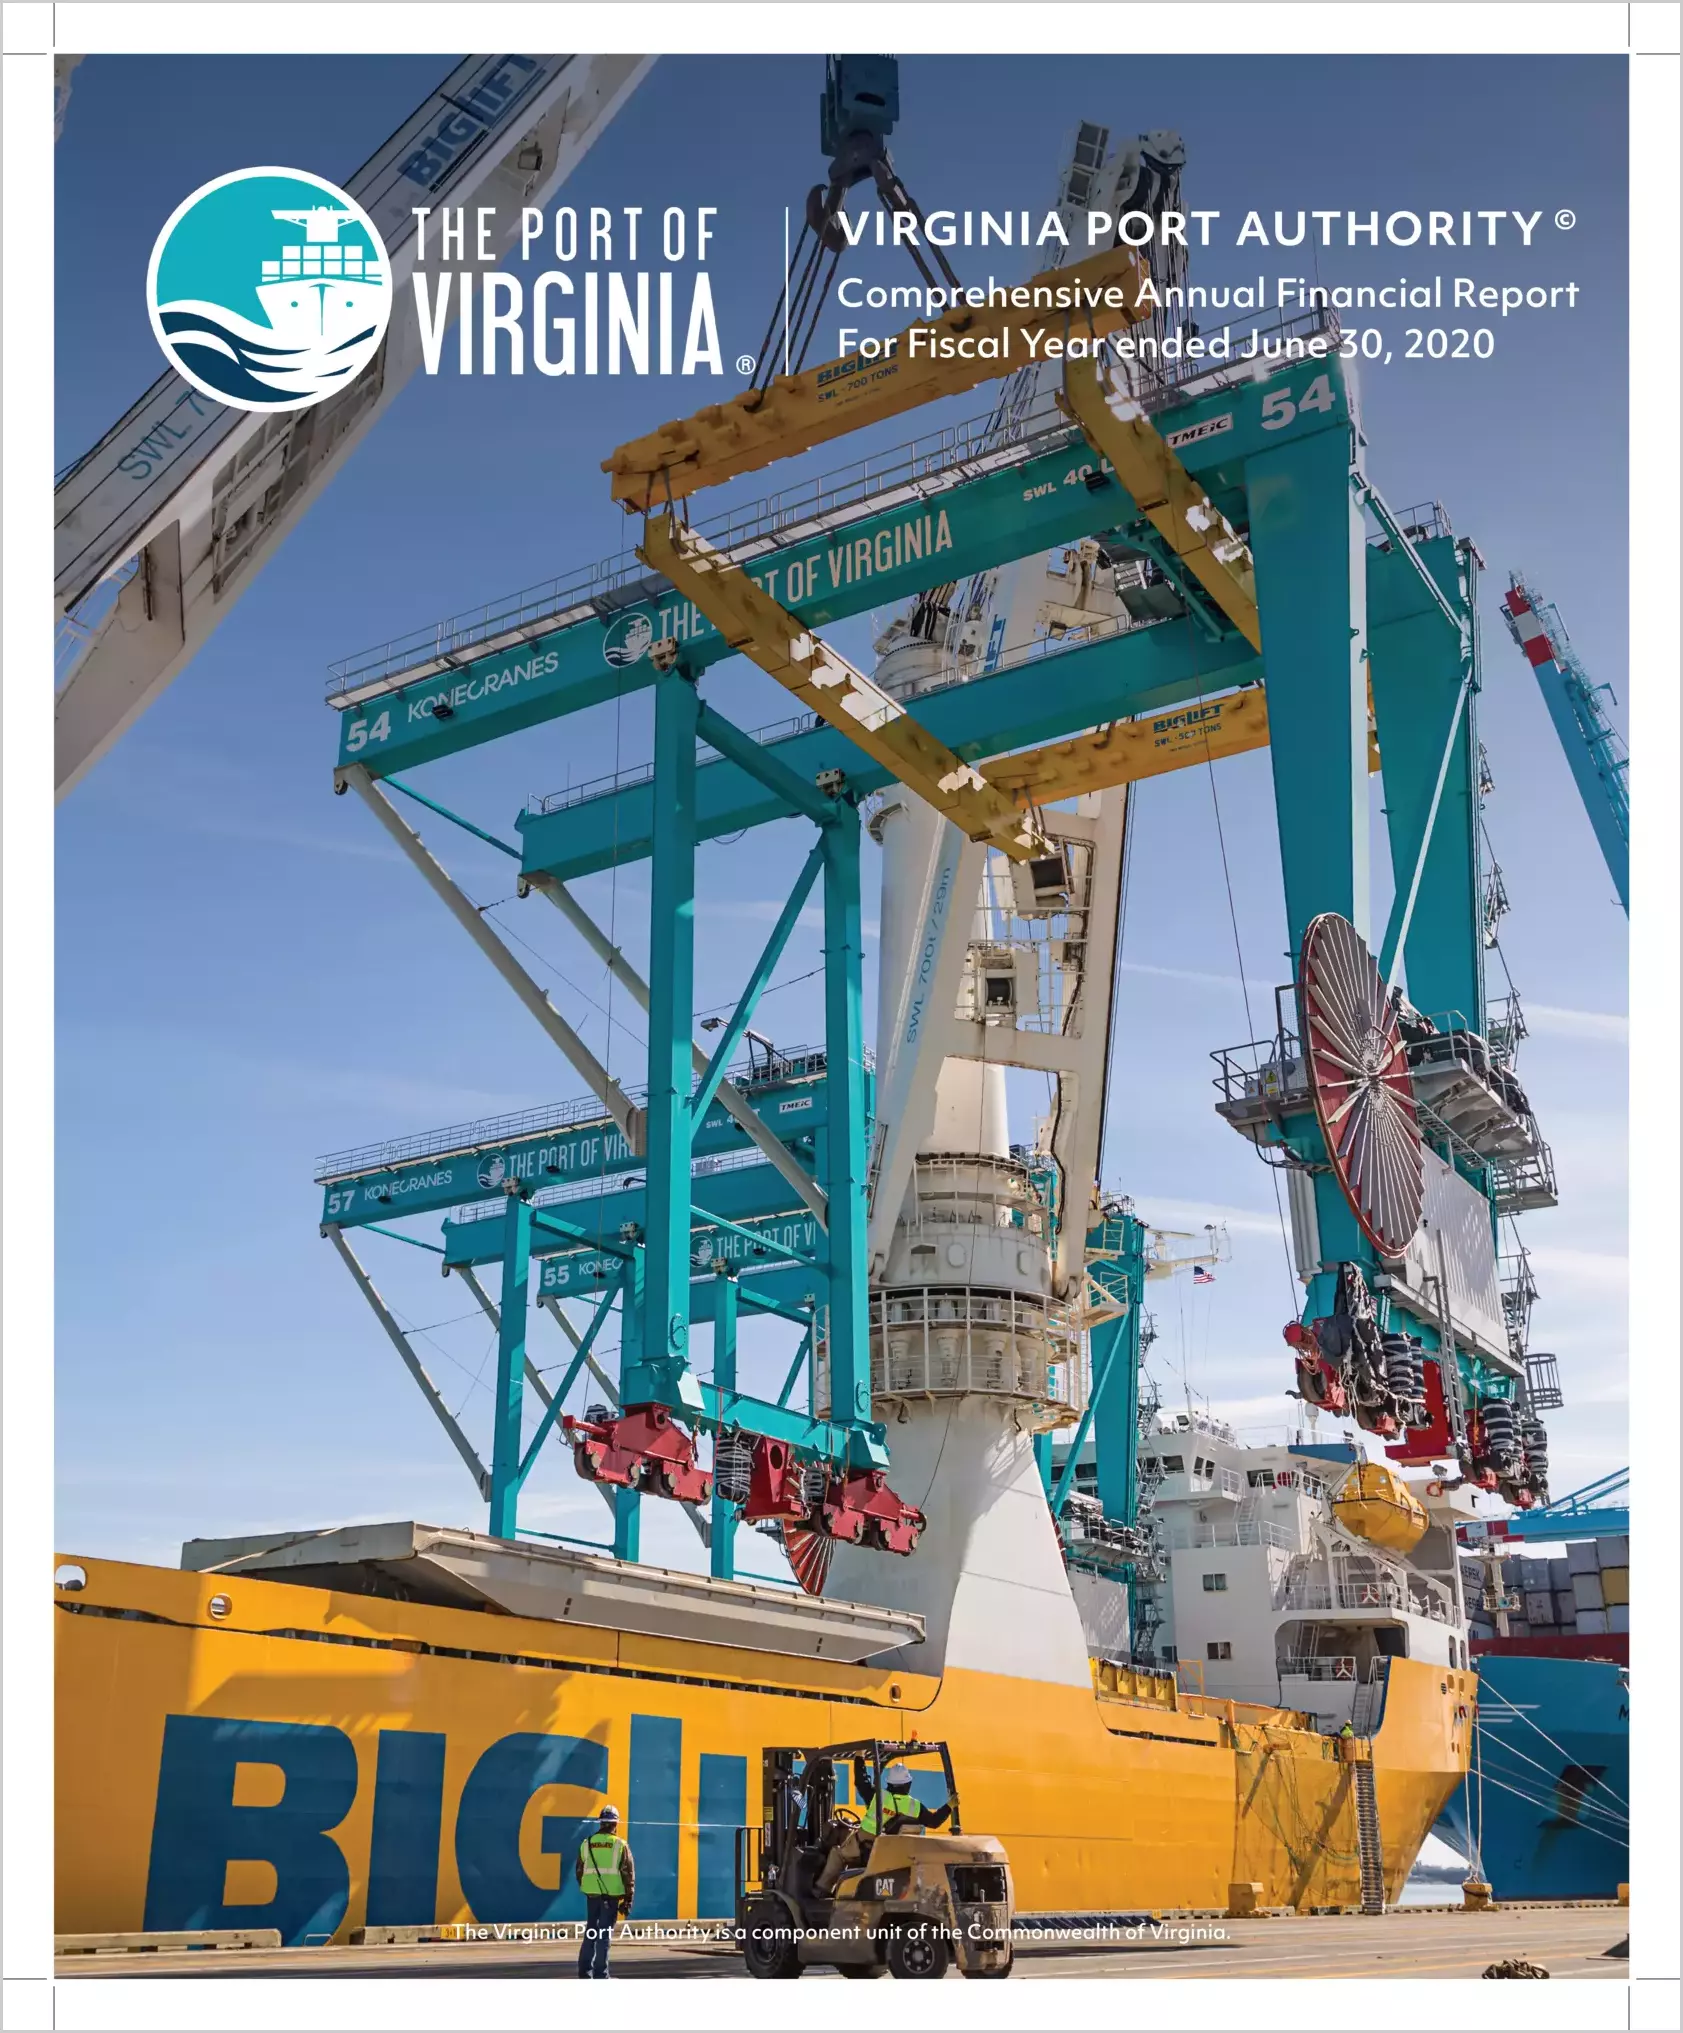 Virginia Port Authority Financial Statements for the year ended June 30, 2020